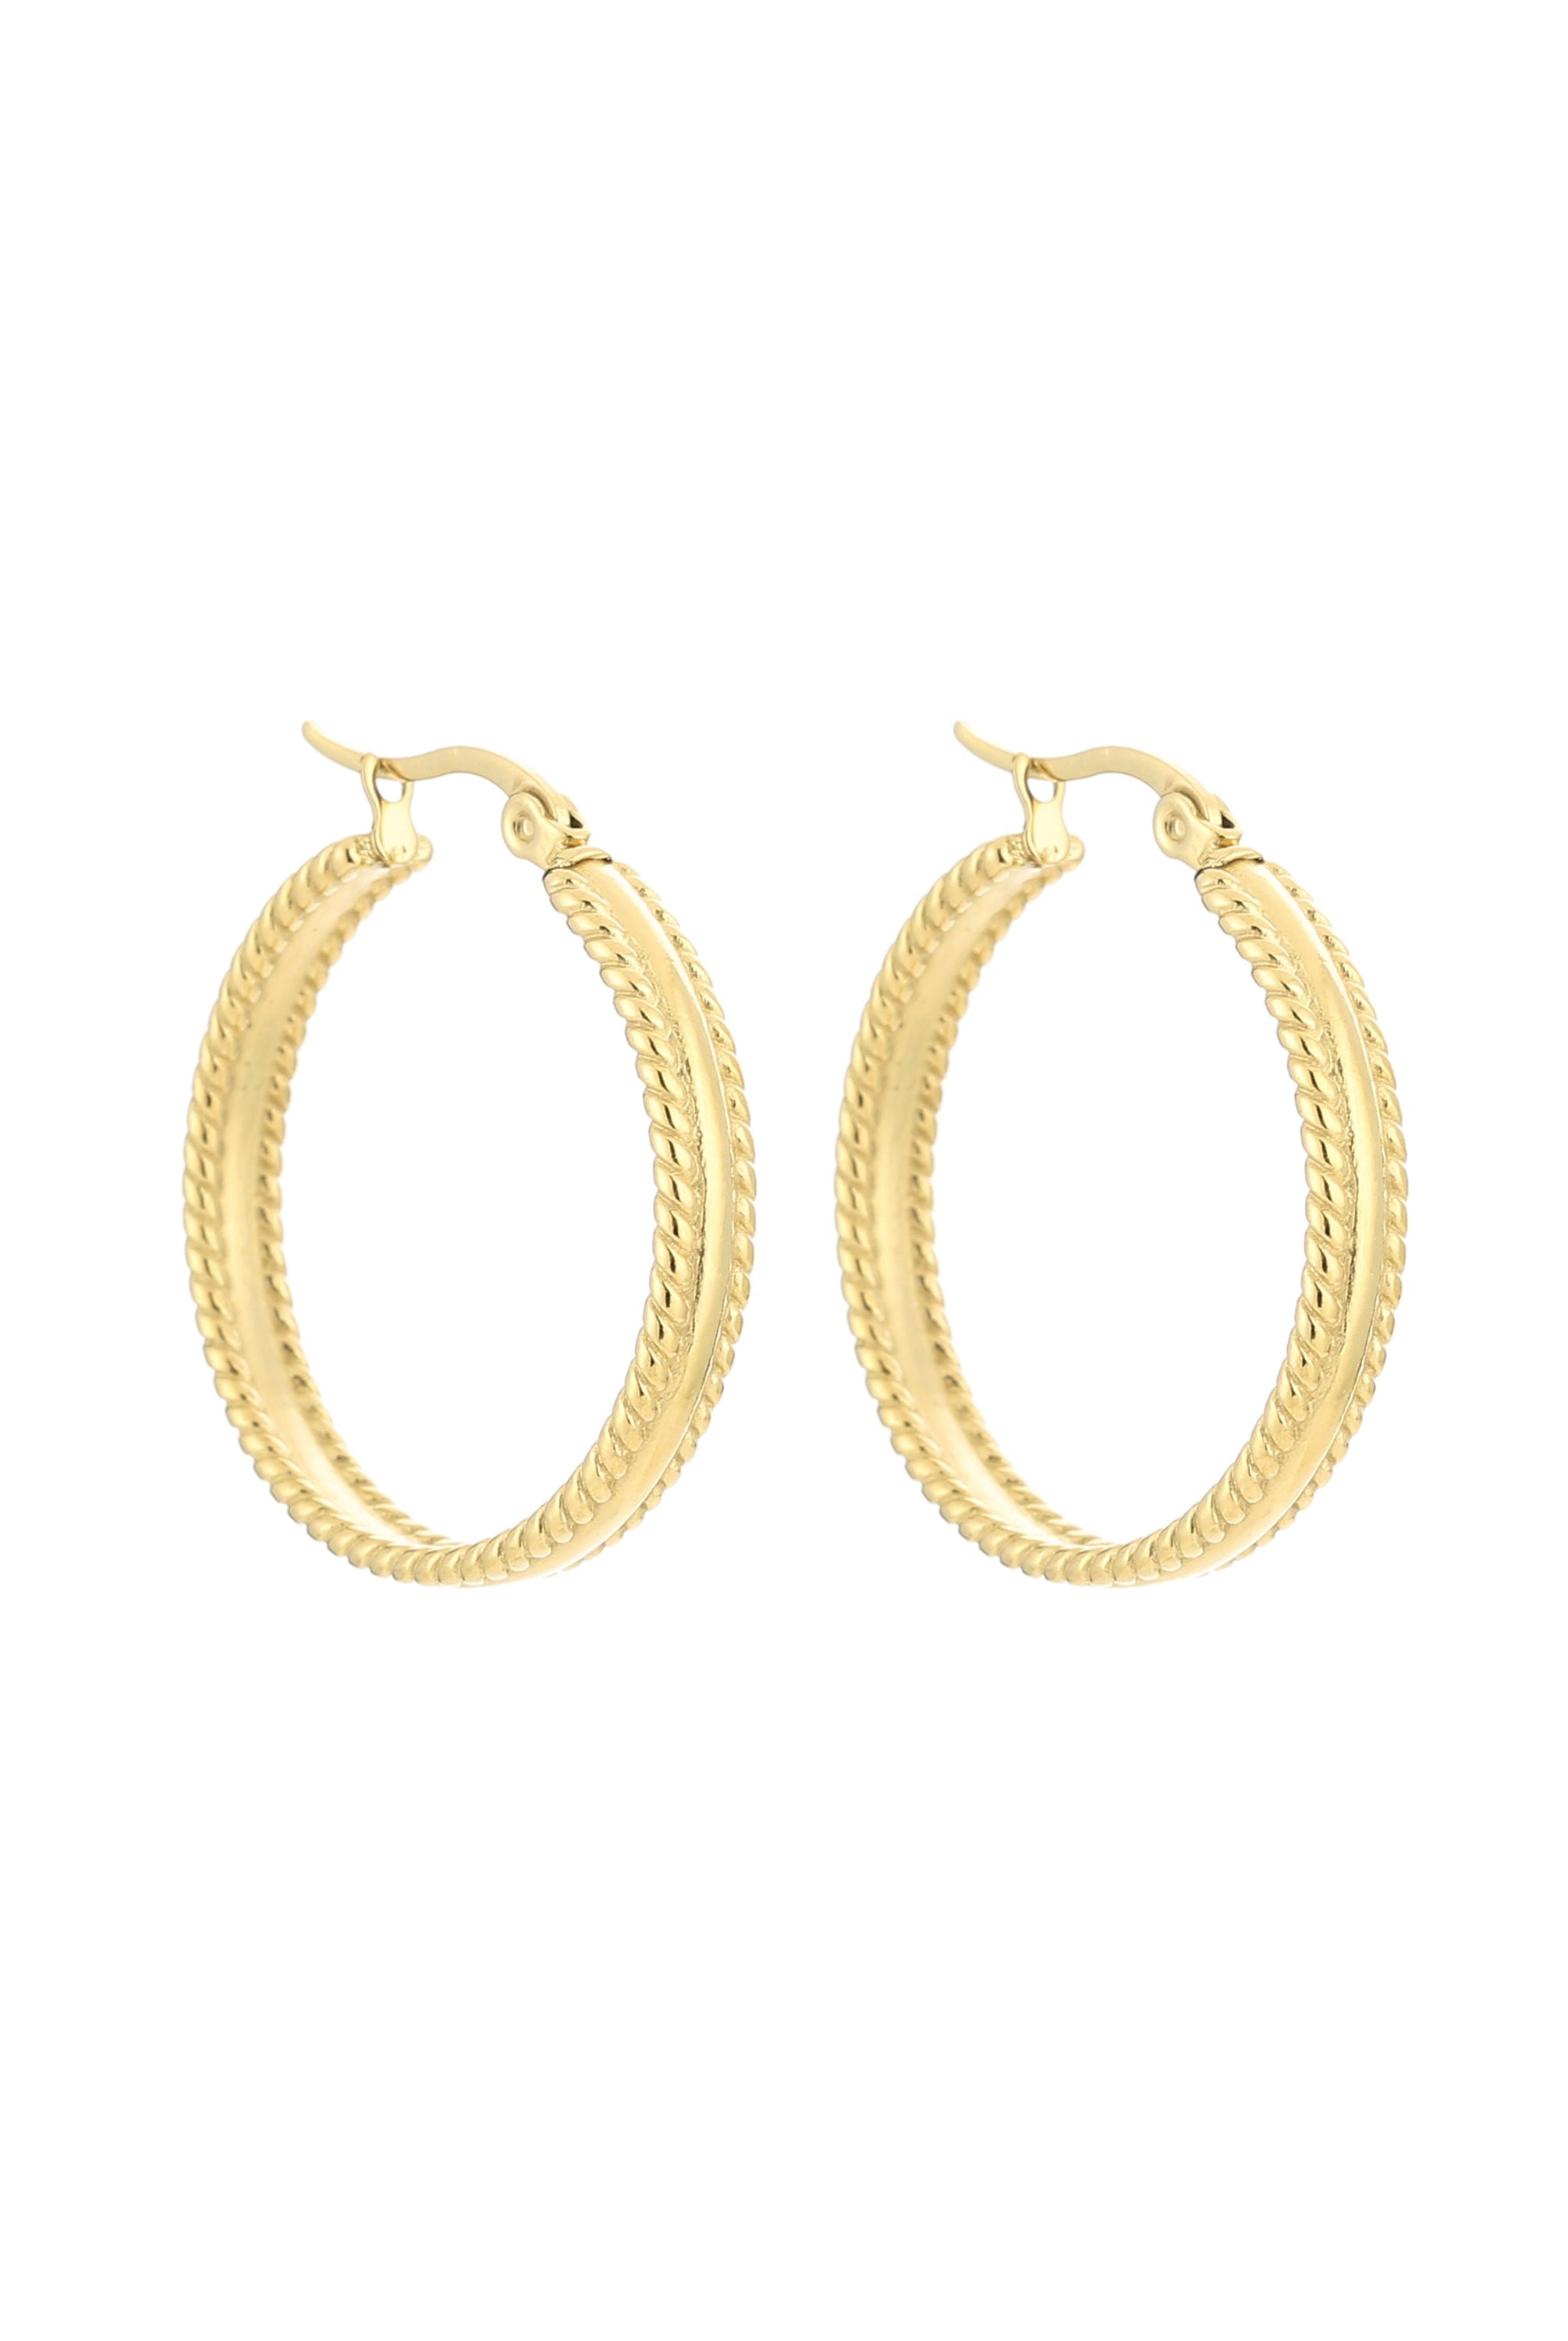 ♥︎WAVE HOOPS 28MM - My Favourites